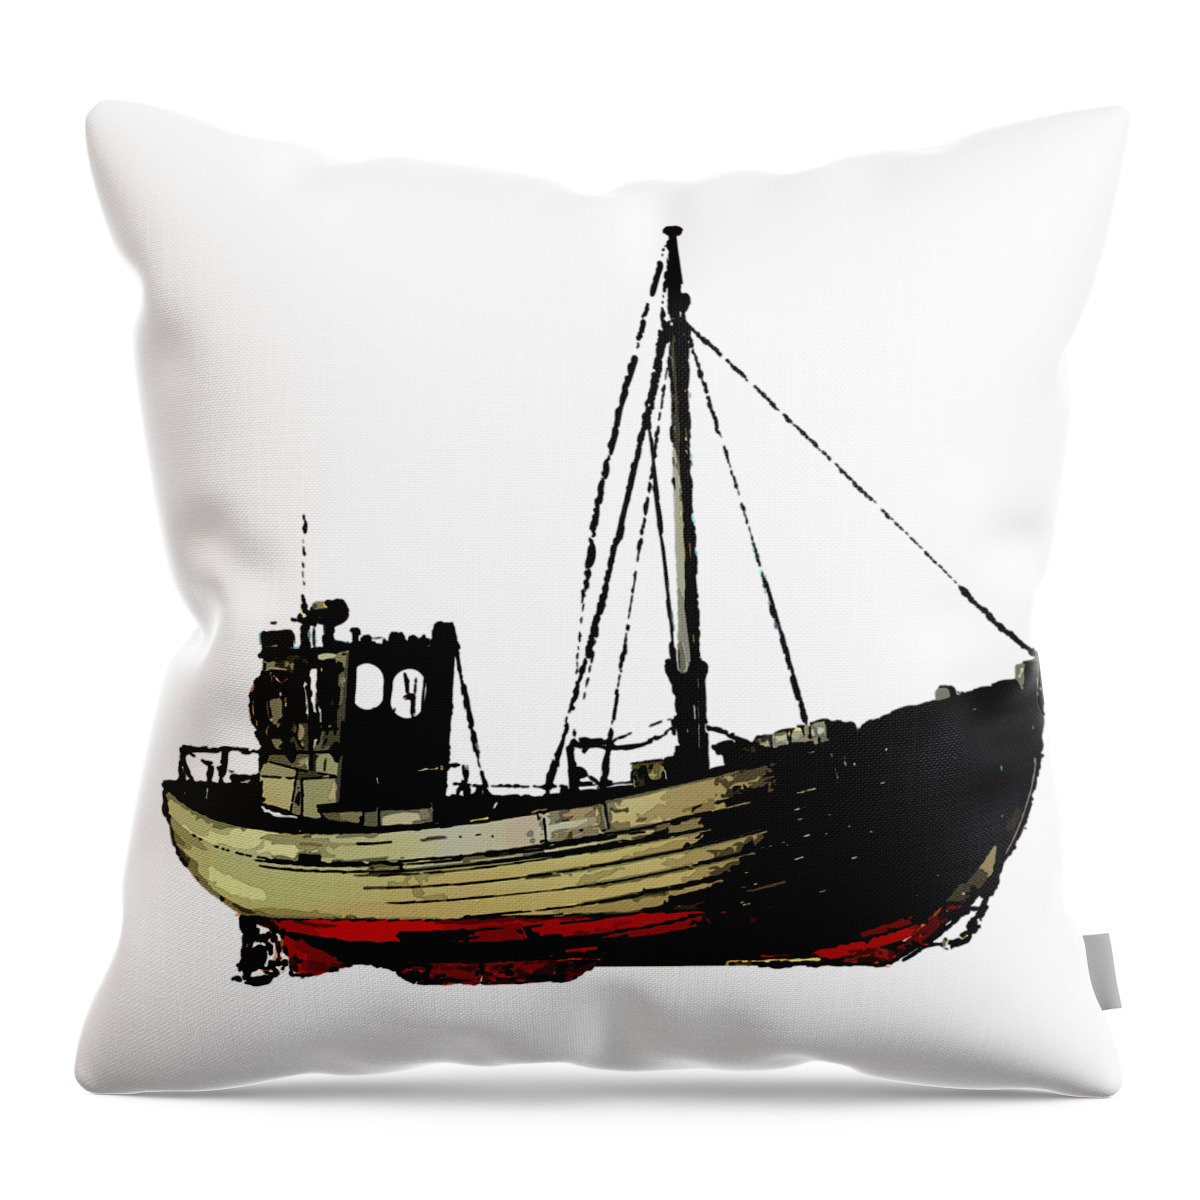 Fishing Throw Pillow featuring the digital art Fishing Boat by Piotr Dulski